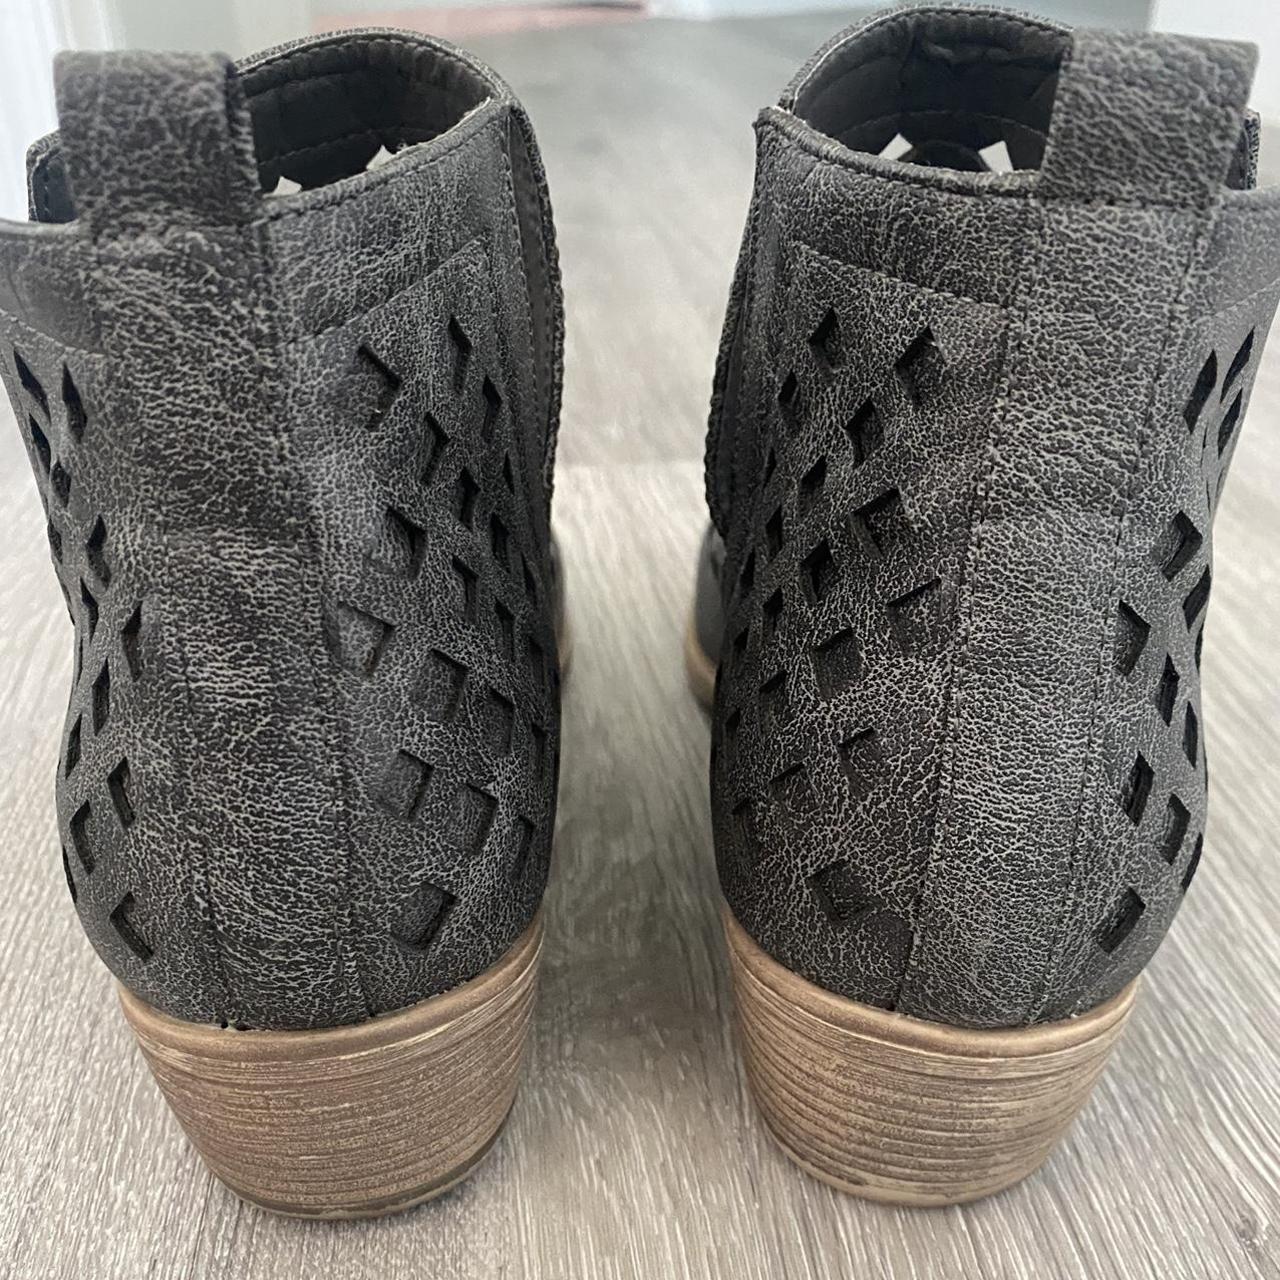 Chic Women's Grey Boots (3)